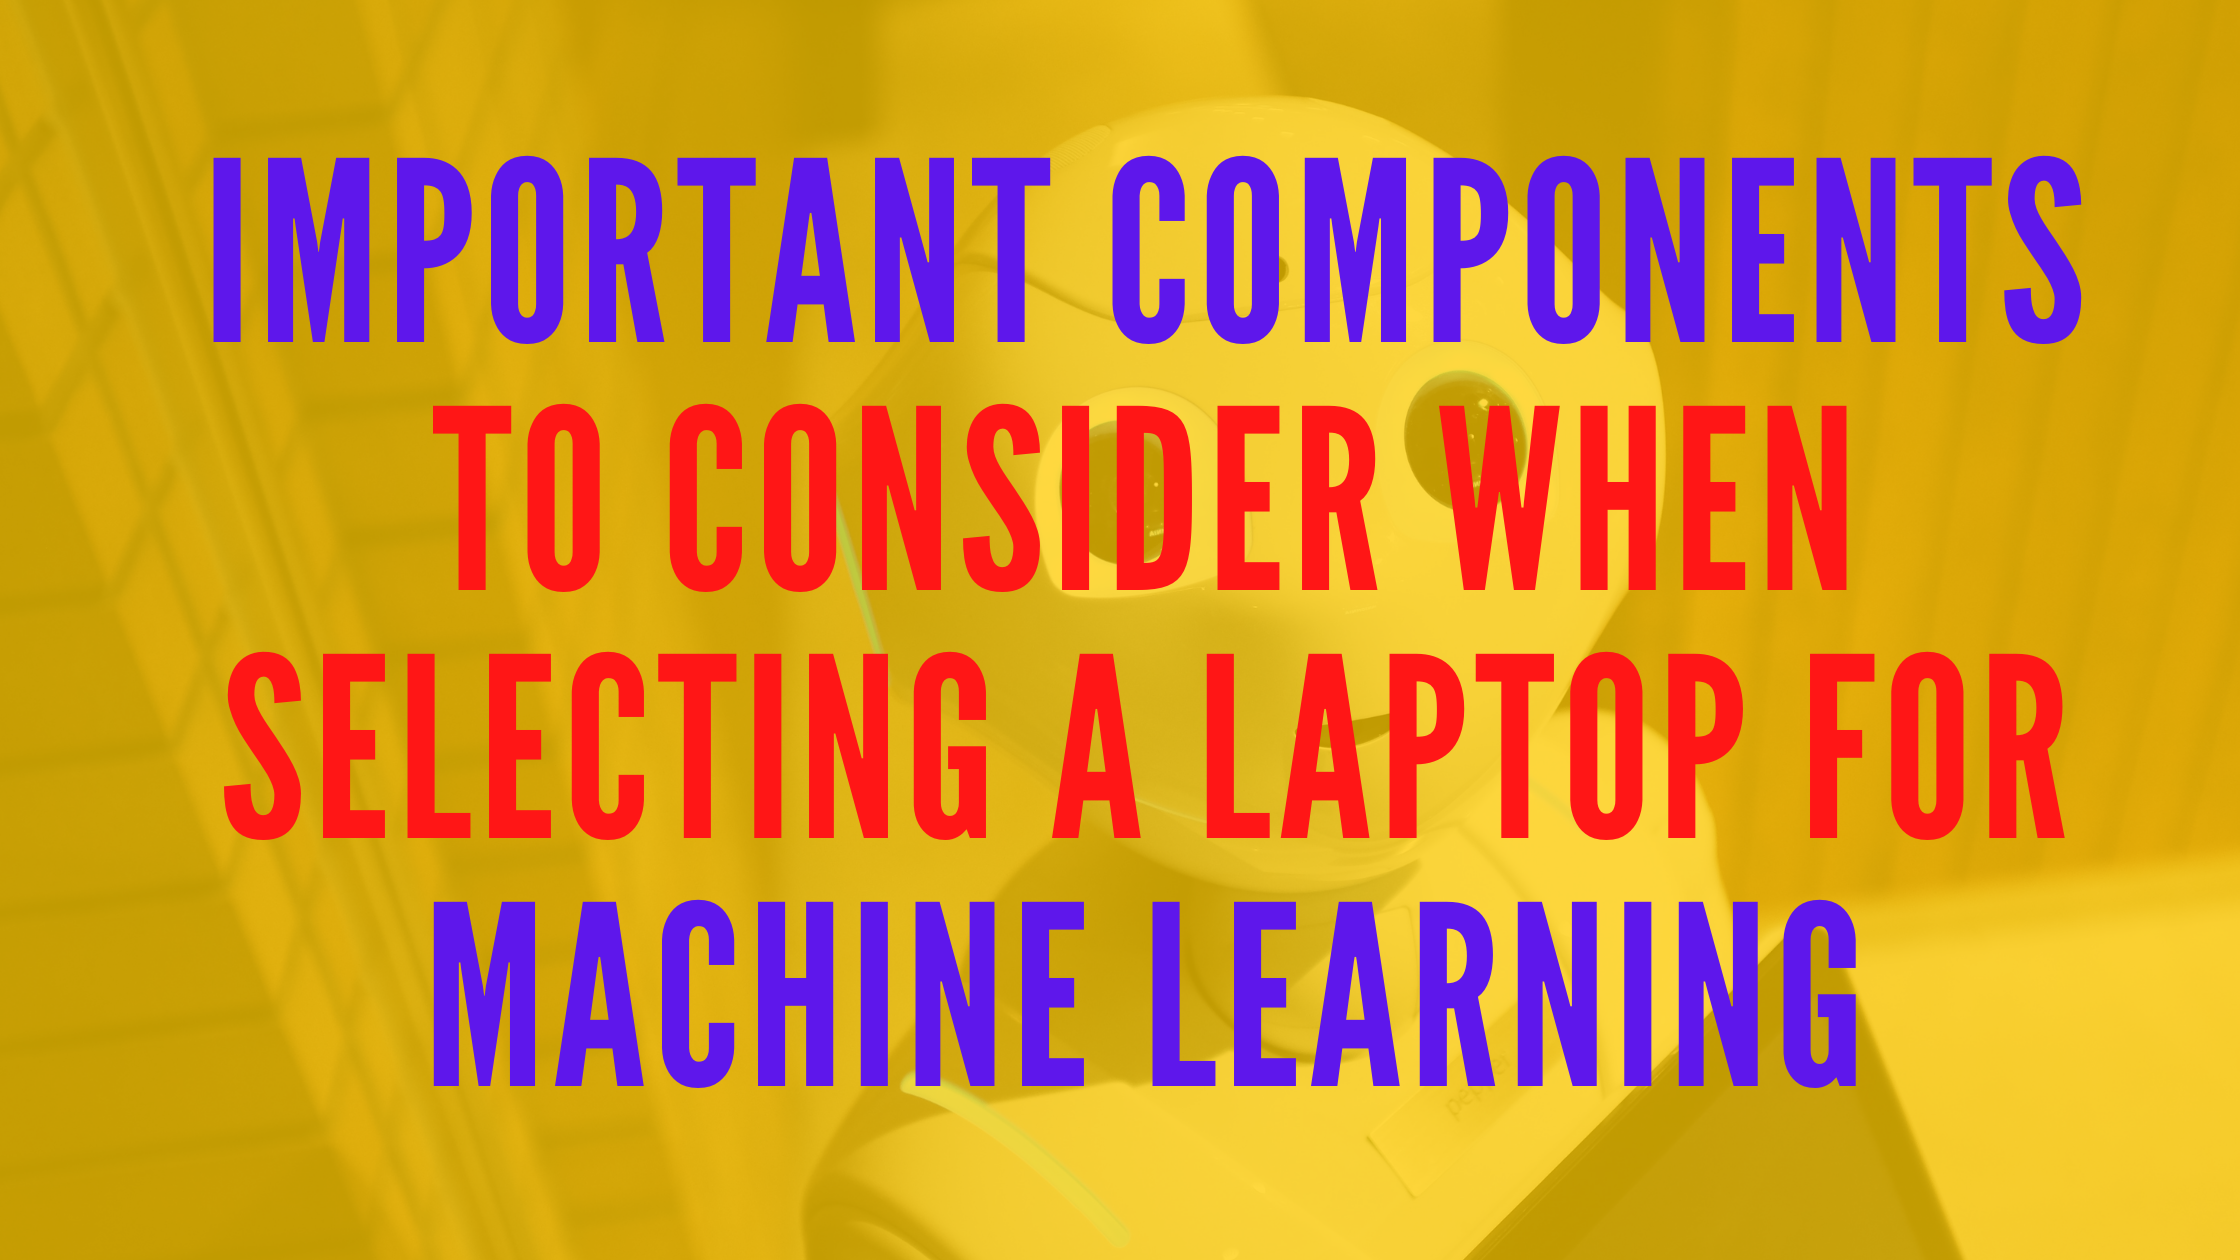 Important components to consider when selecting a laptop for machine learning